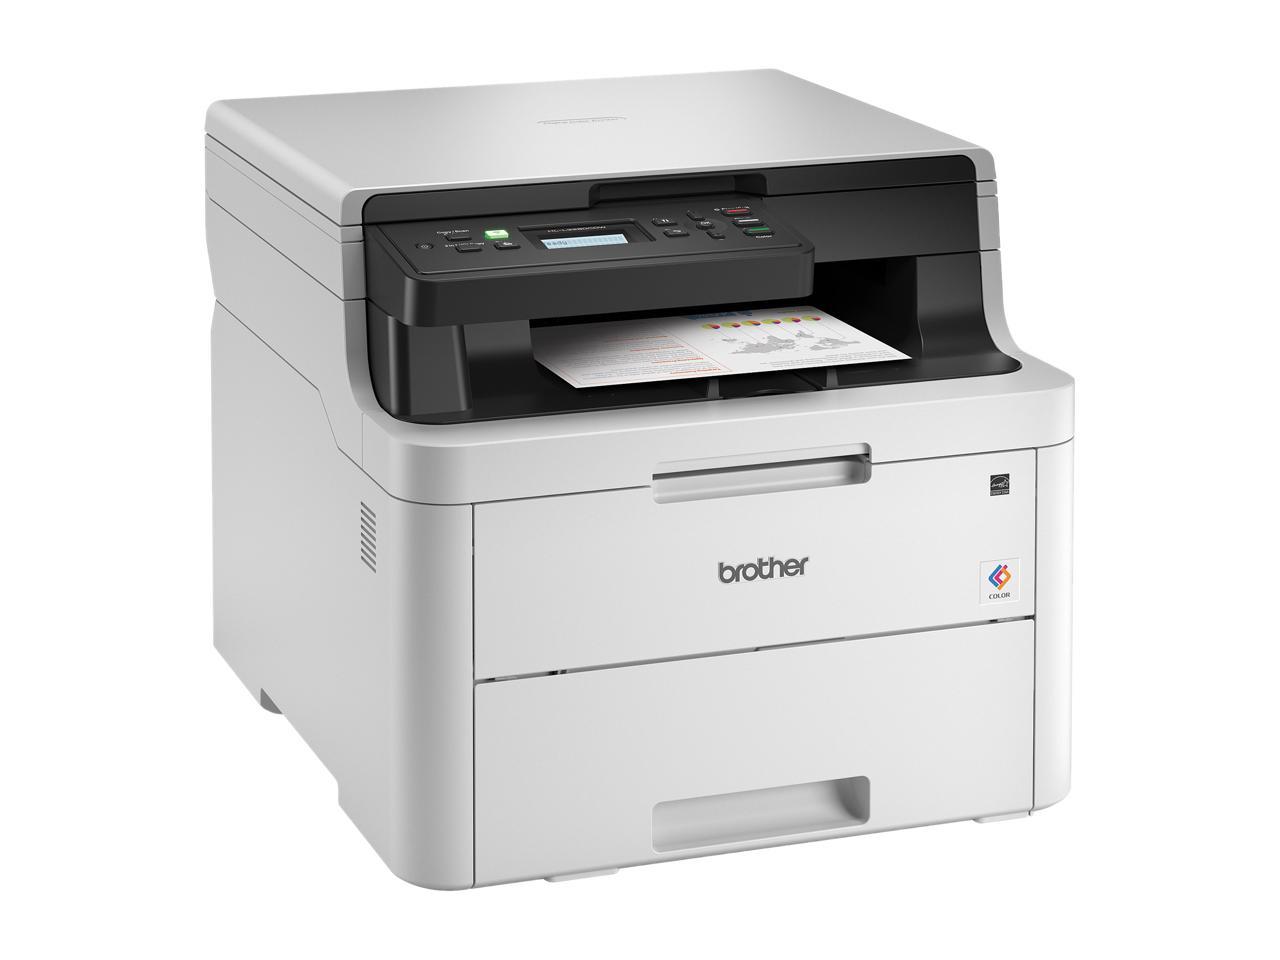 Brother Digital Color Printer Providing Laser Quality Results with Convenient Flatbed Copy & Scan, Plus Wireless and Duplex Printing HL-L3290CDW